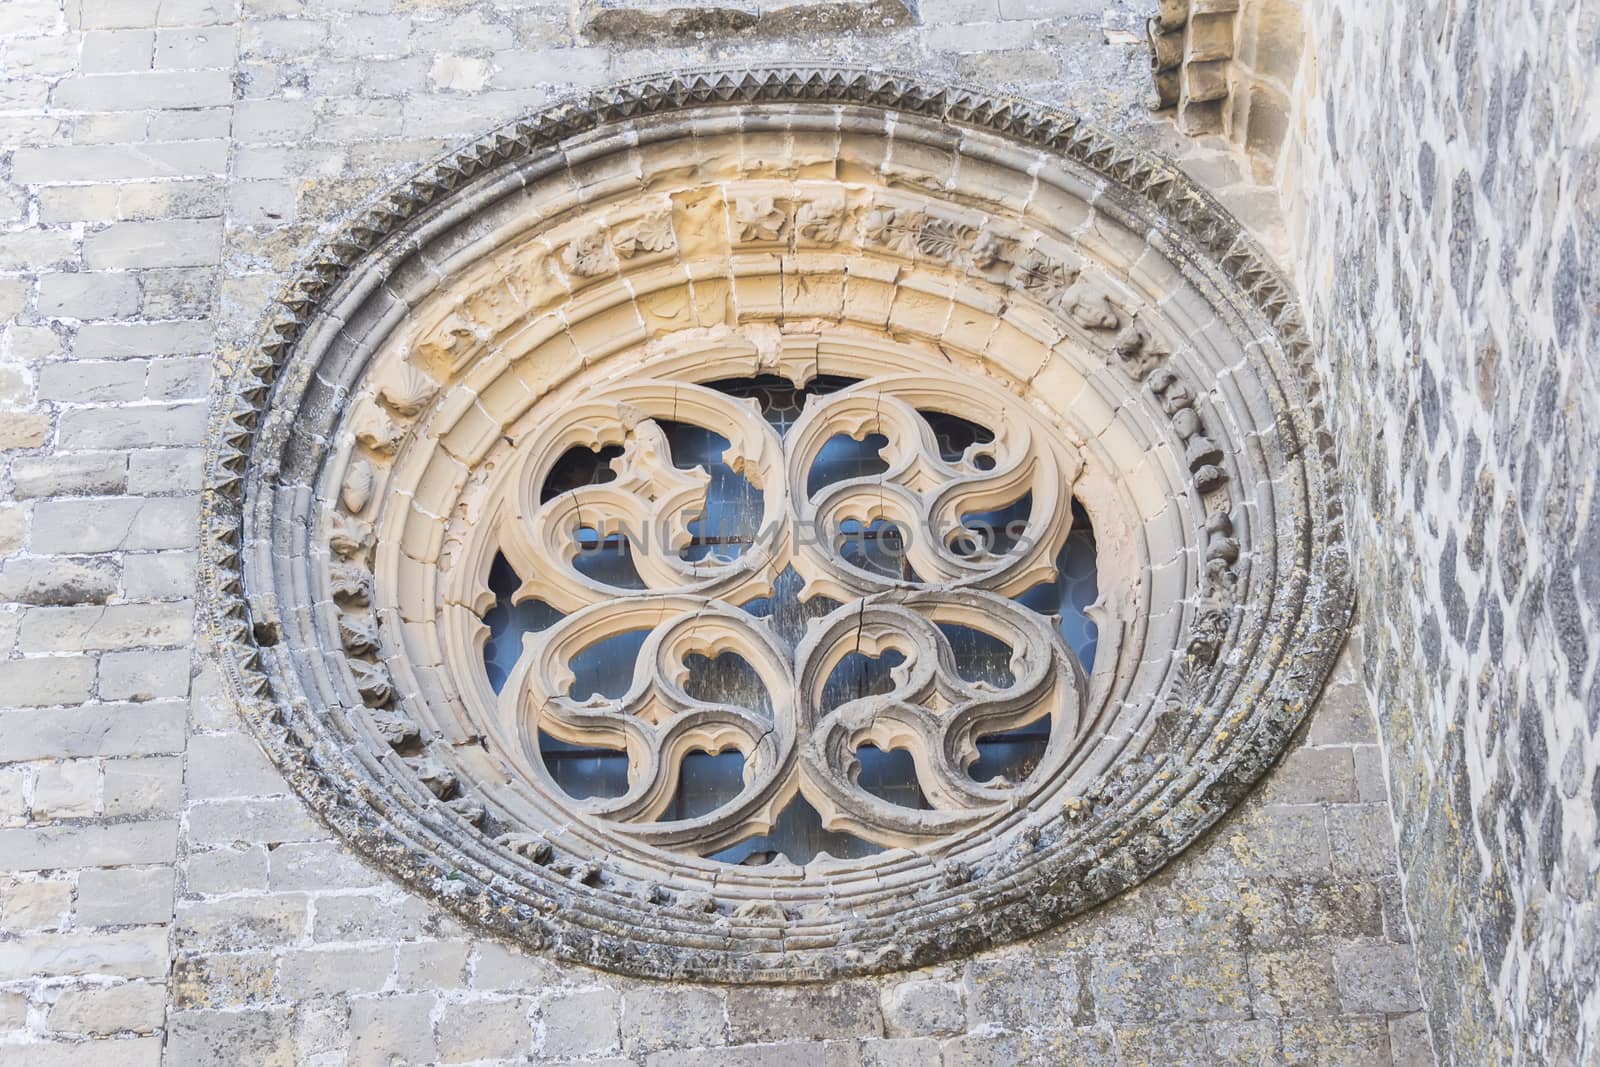 Baeza Cathedral rosette, Jaen, Spain by max8xam